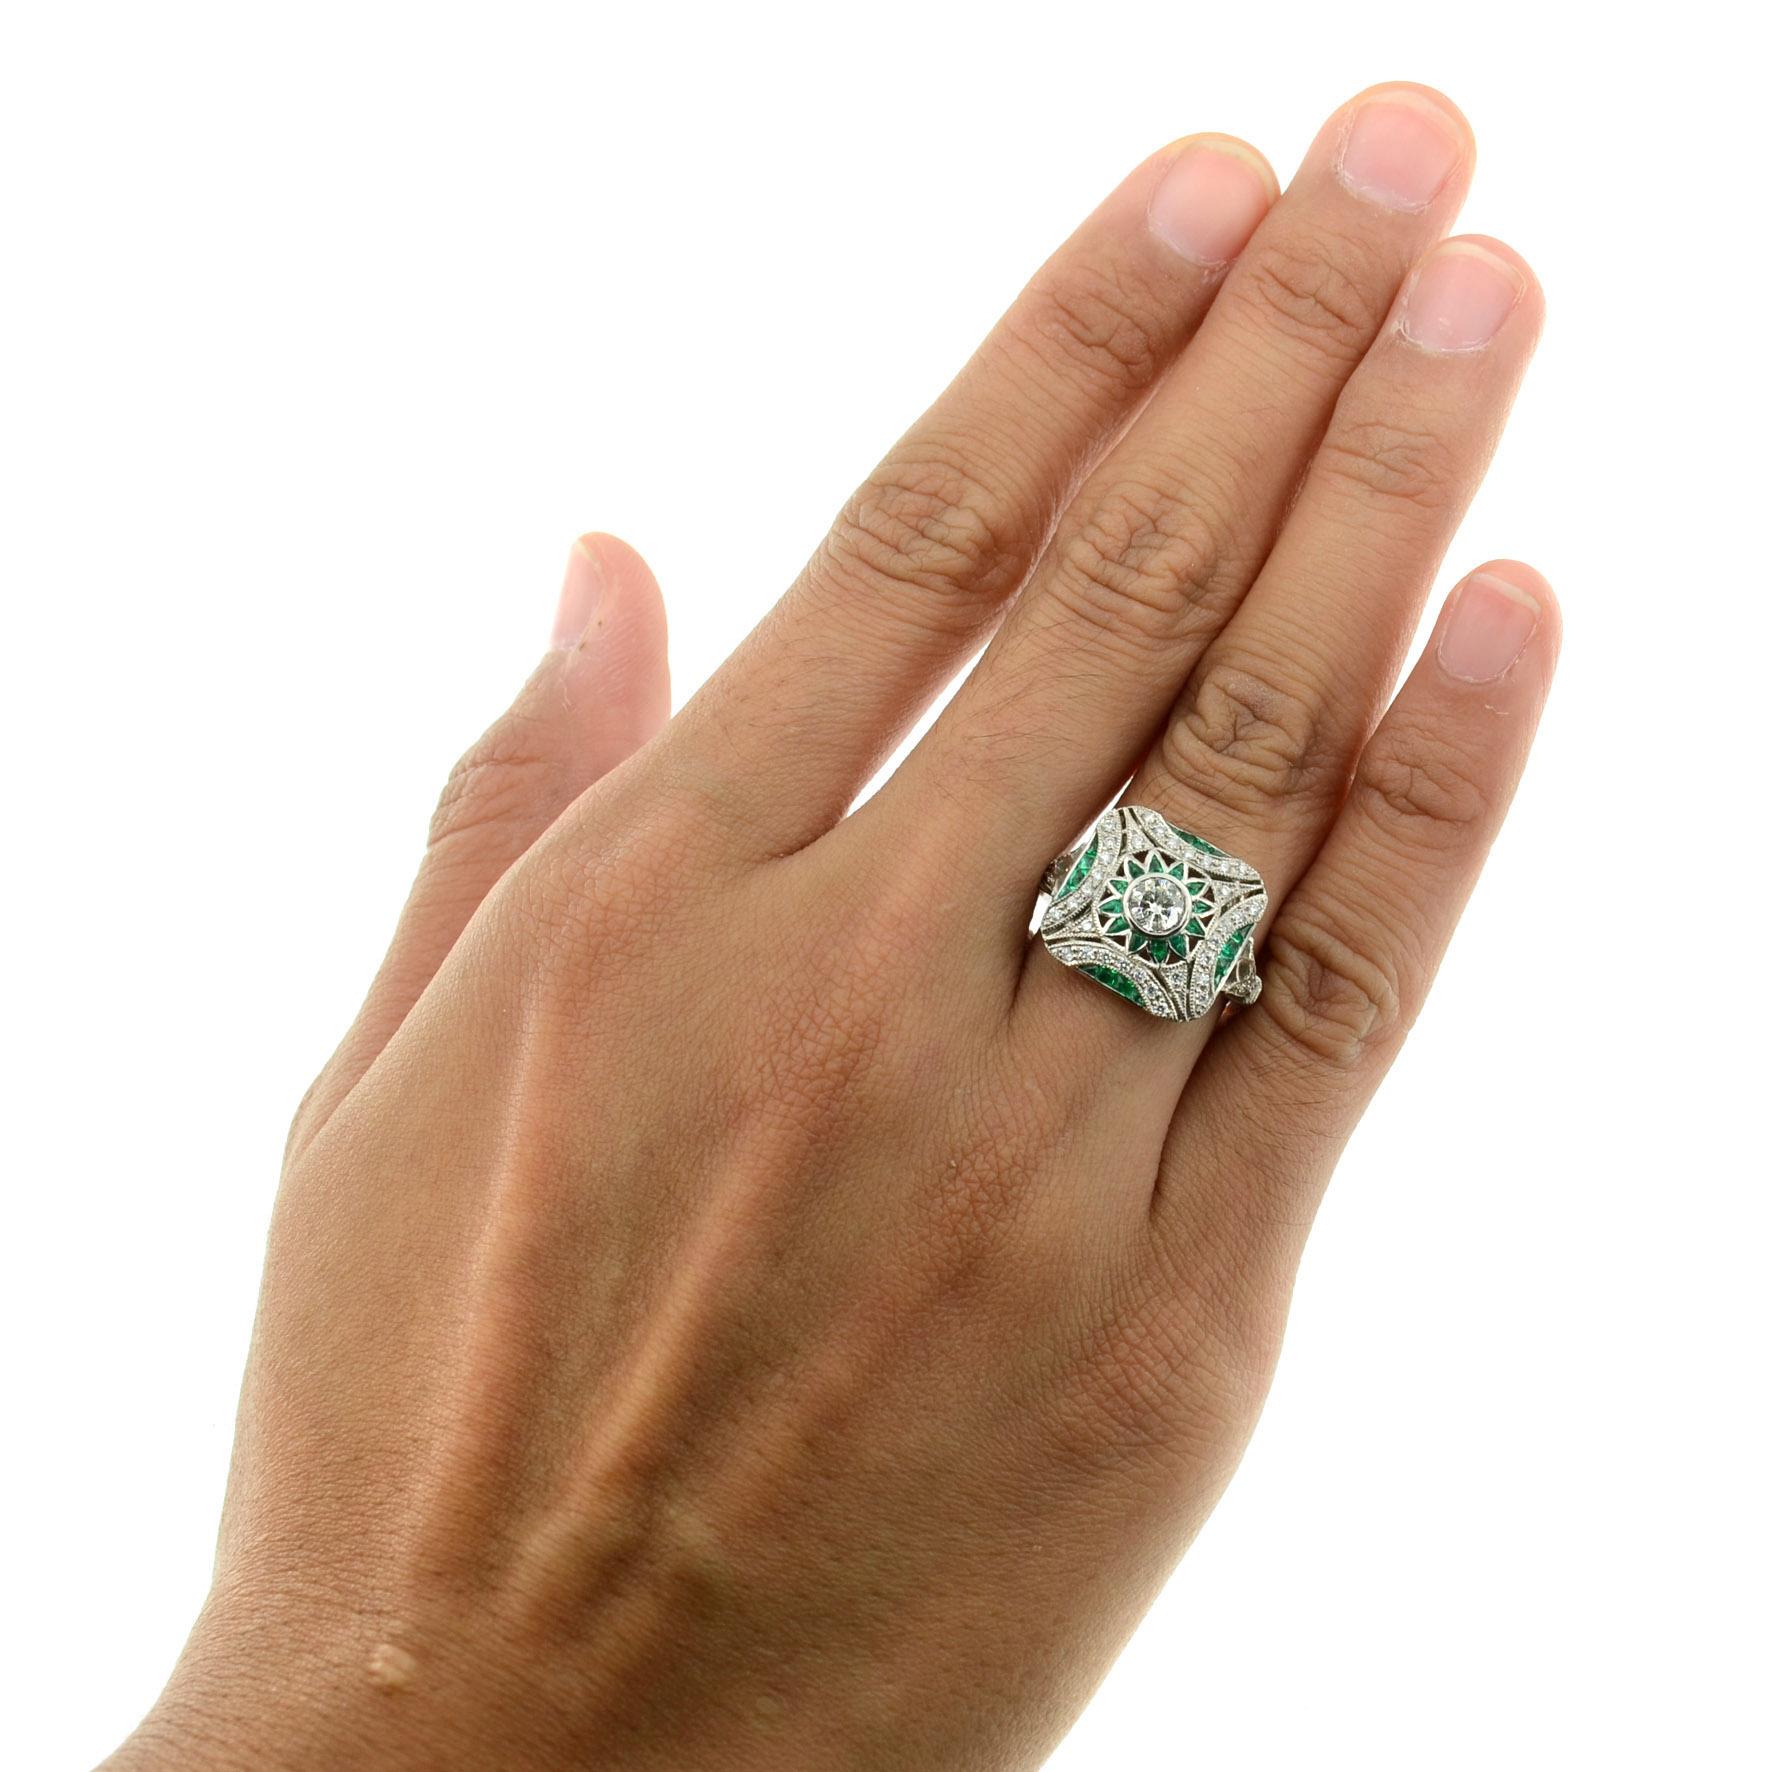 This vintage style ring centers a round cut diamond, weighing approximately 0.50 carat in bezel set. The center stone is accented by a floral halo of vivid green emerald and round white diamonds. A border of diamonds is set along the edge of the